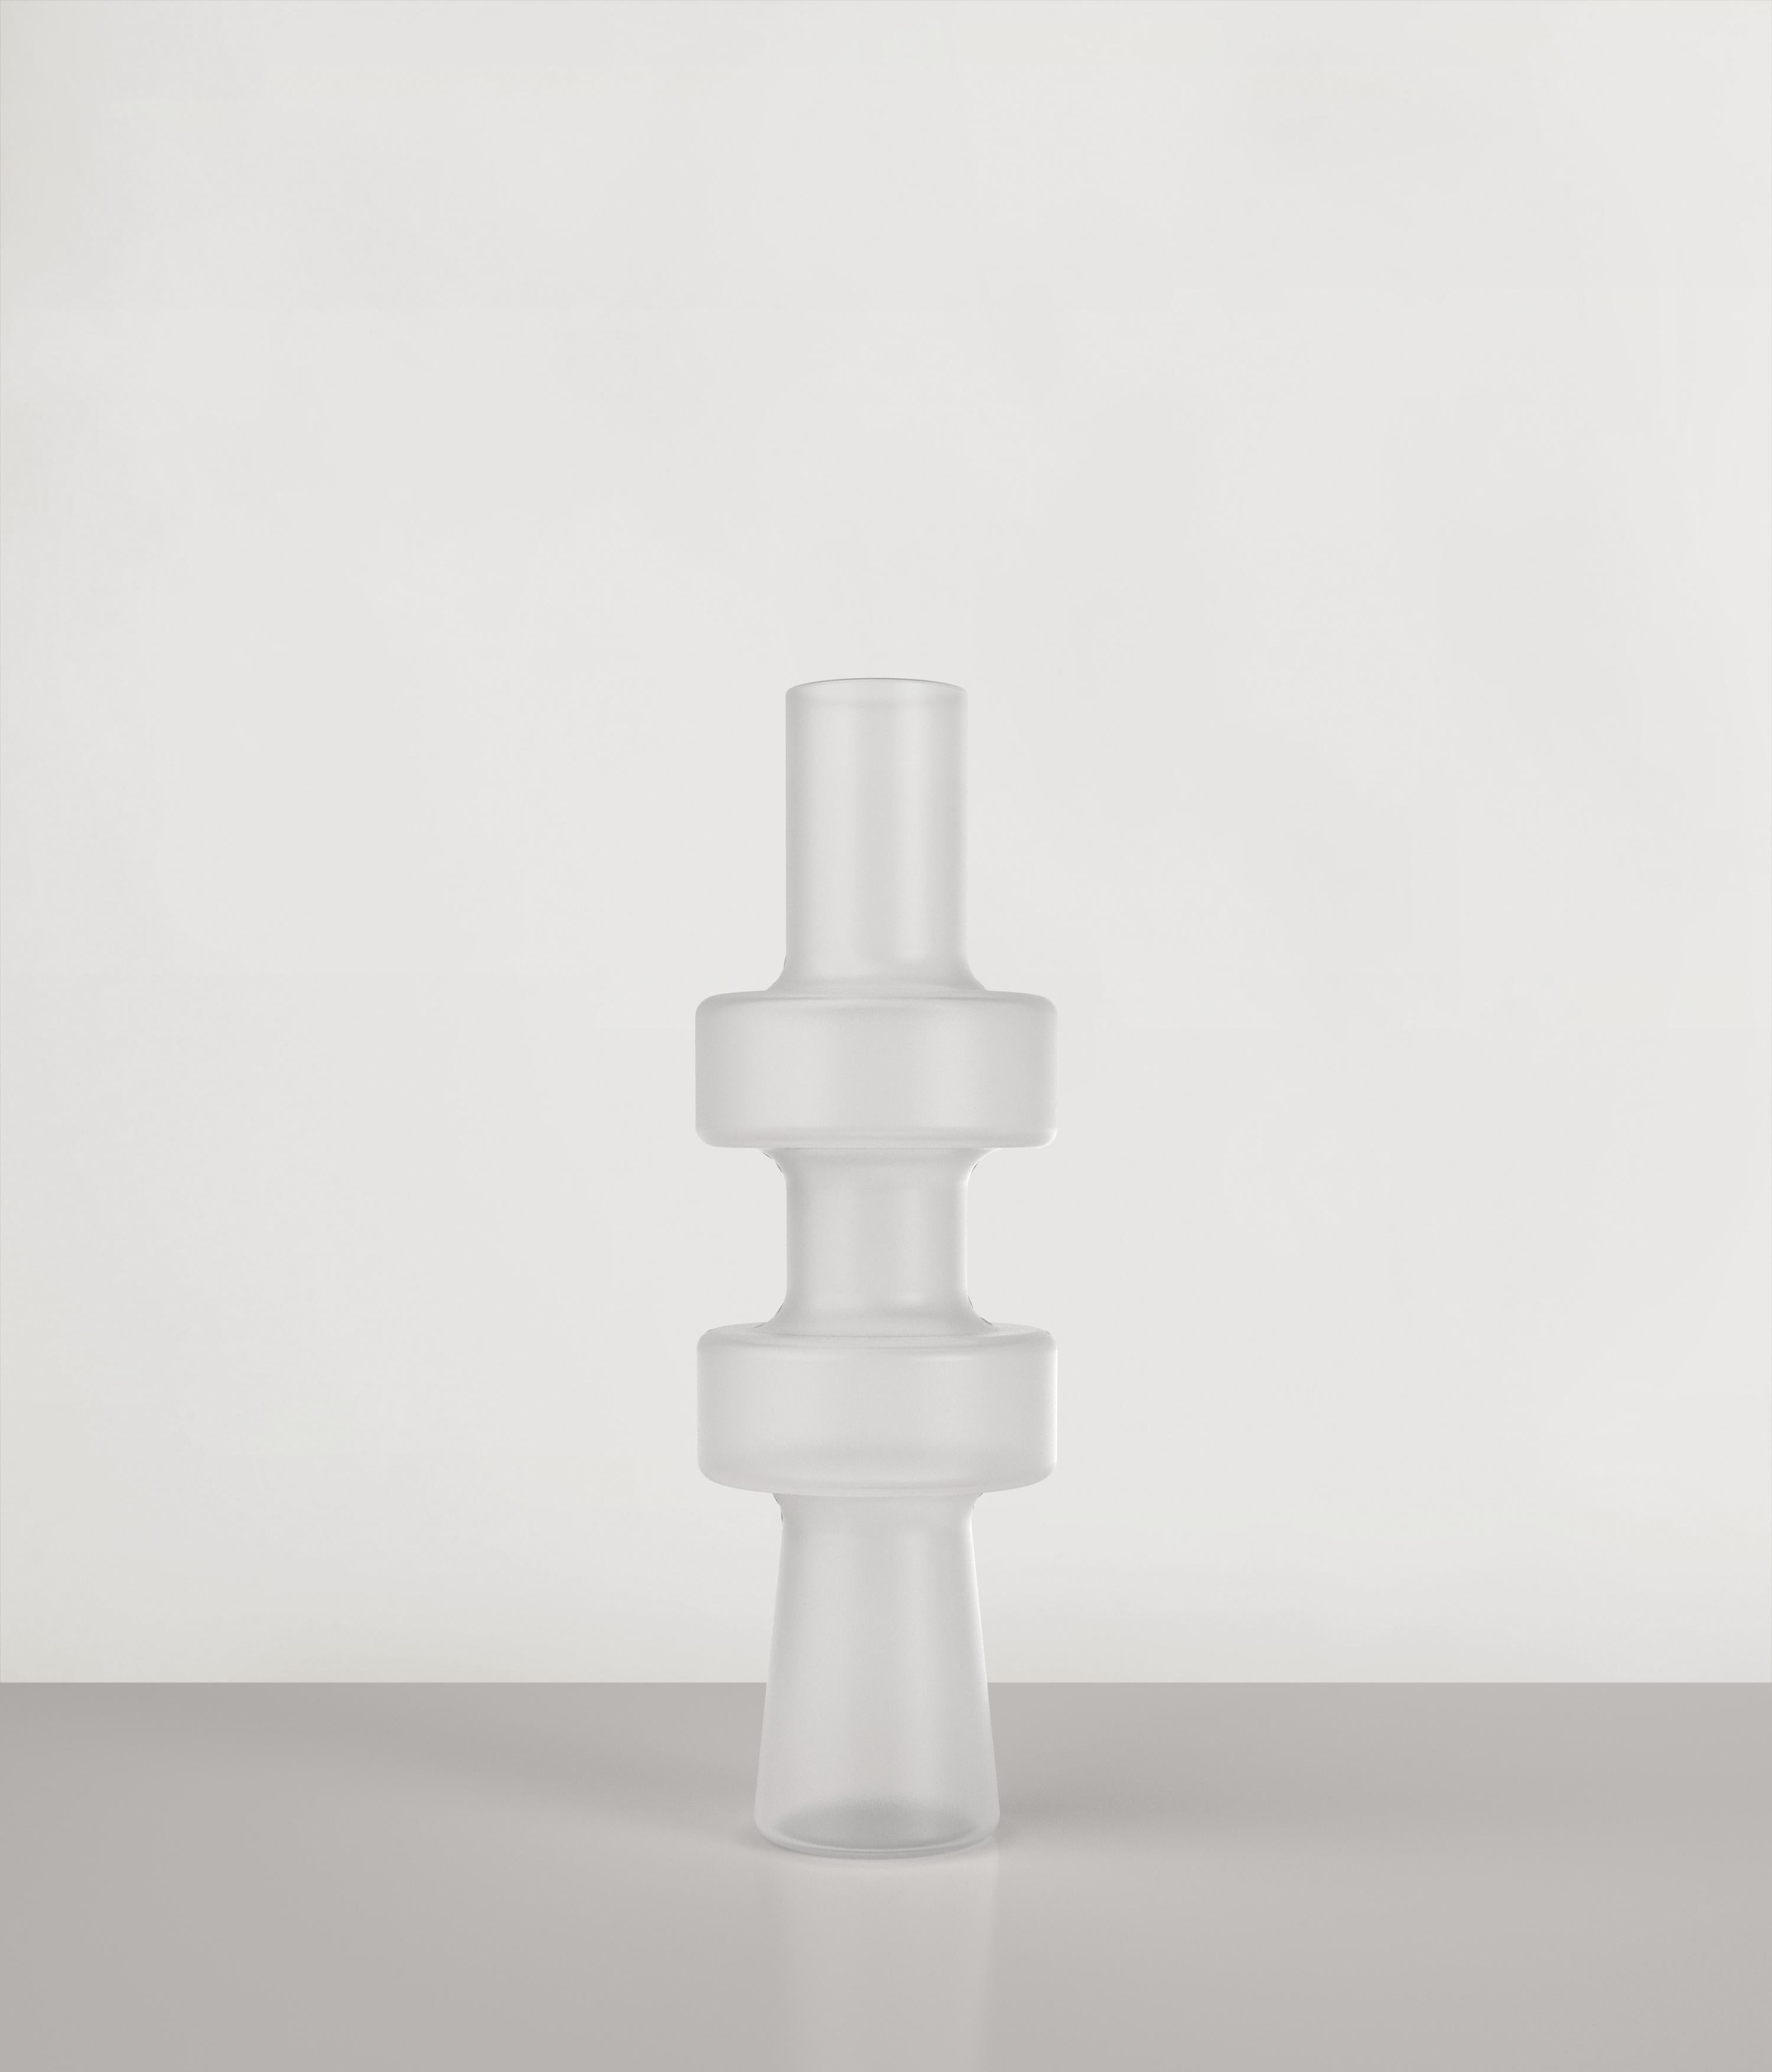 Uppa V2 vase by Edizione Limitata
Limited Edition of 1000 pieces. Signed and numbered.
Dimensions: D12 x H38 cm
Materials: sanded glass

Uppa is a series of 21st Century sculptural vases made by Italian artisans in blown sanded glass. The piece is